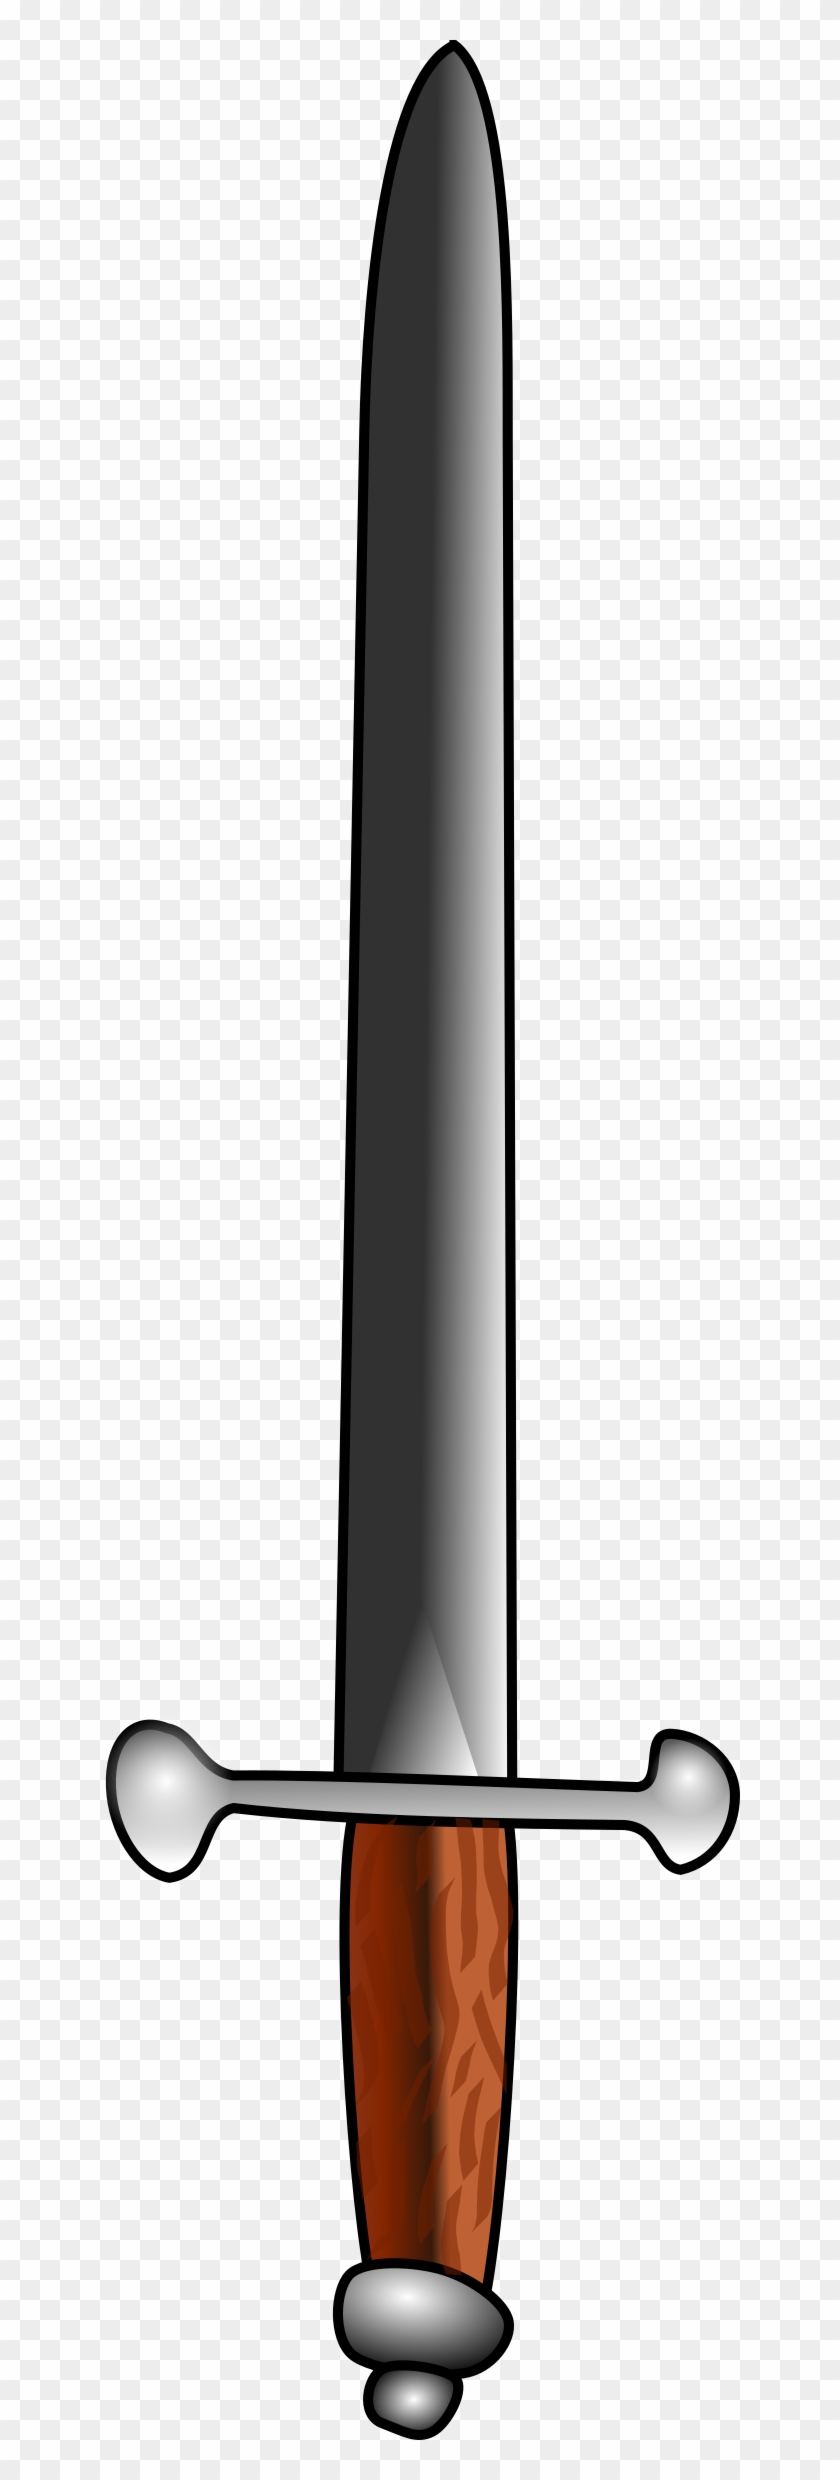 Big Image - Simple Sword Drawing Clipart #1309595